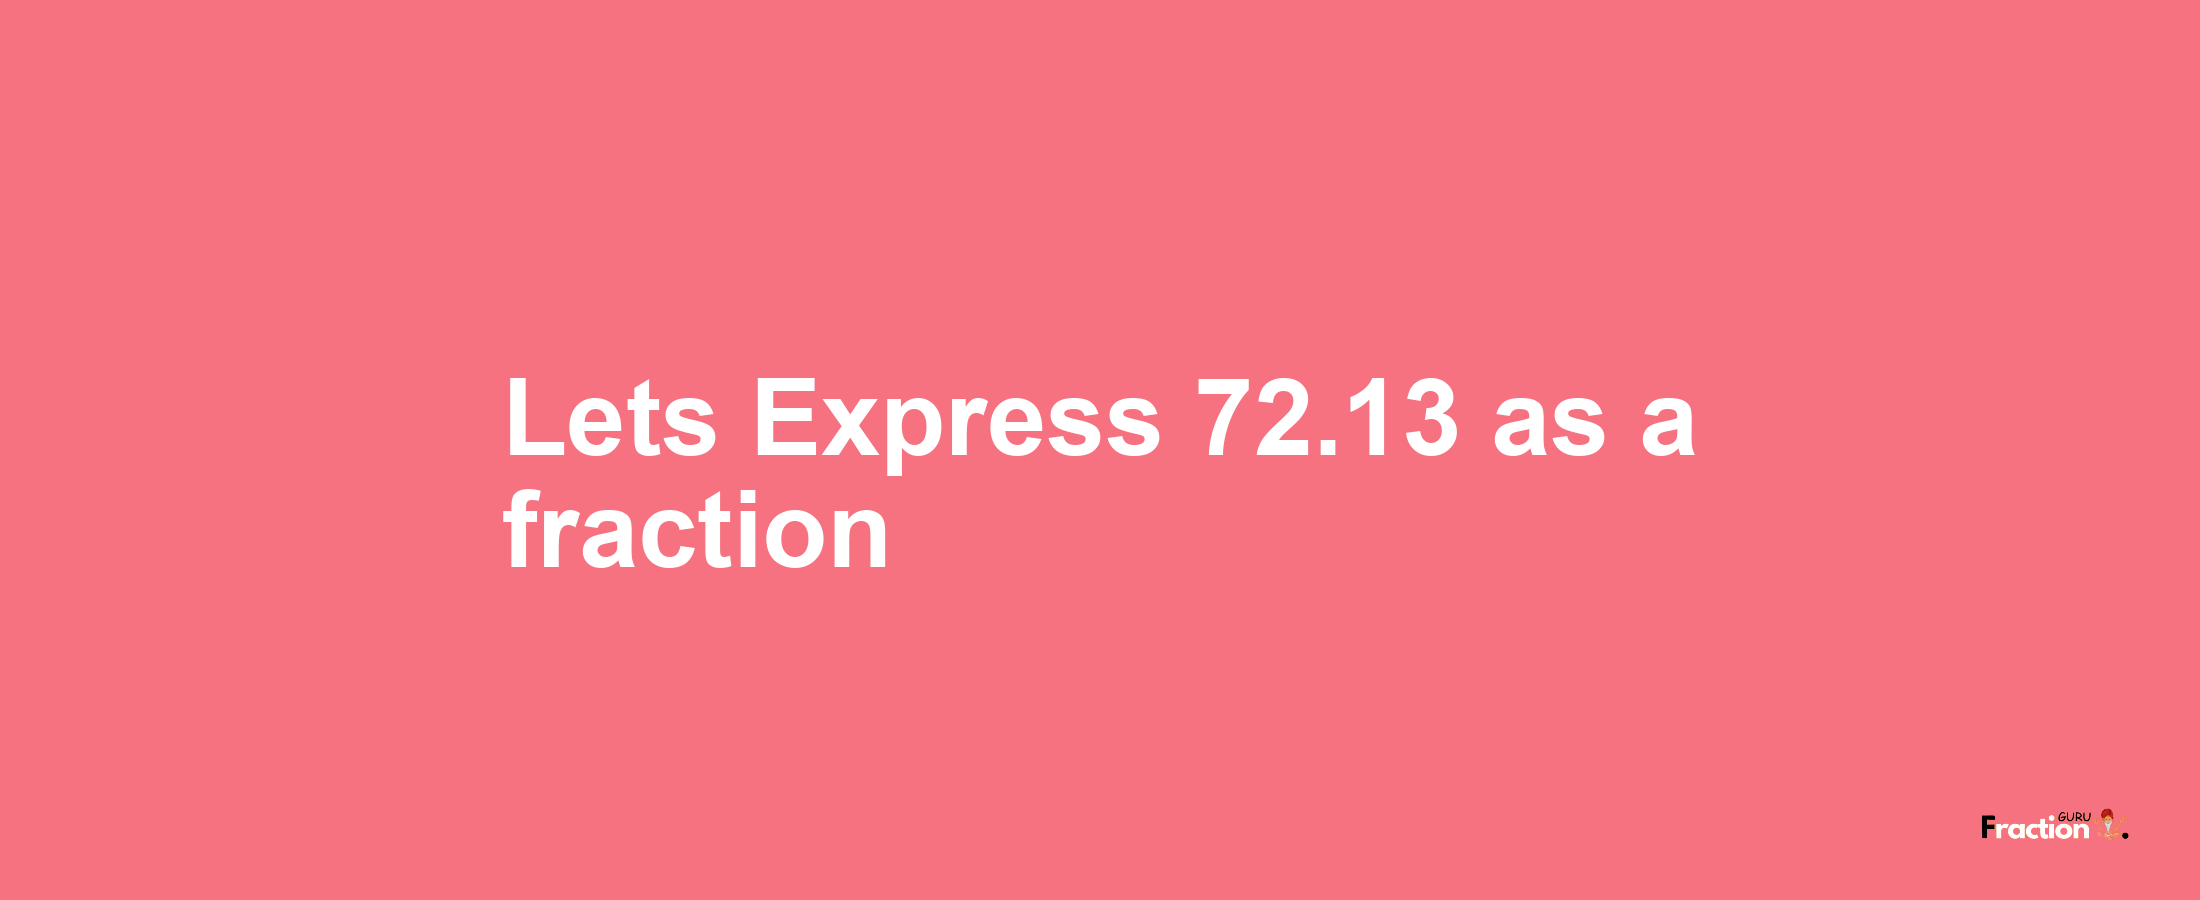 Lets Express 72.13 as afraction